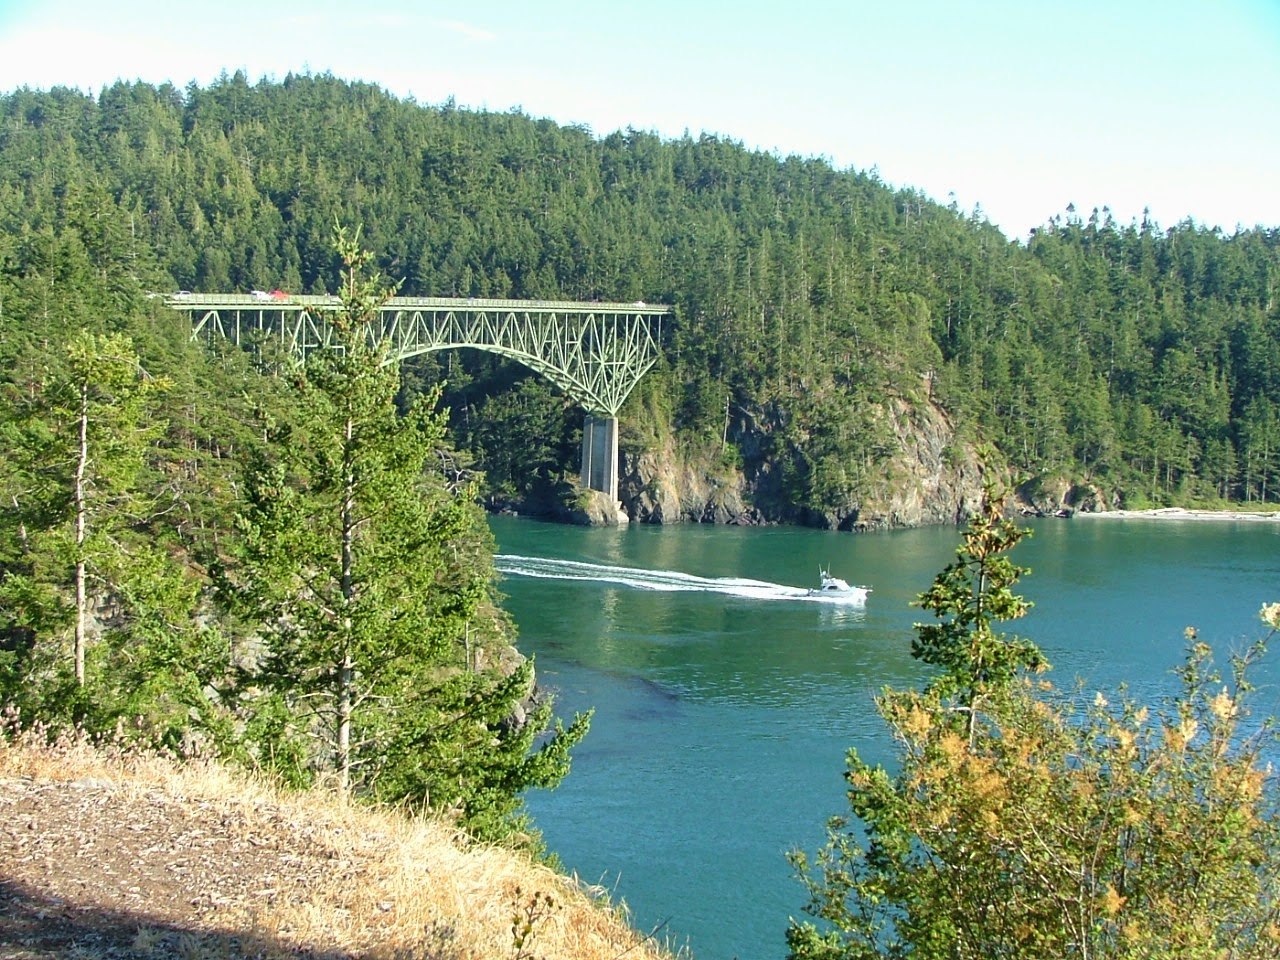 Deception Pass bridge from the hwy